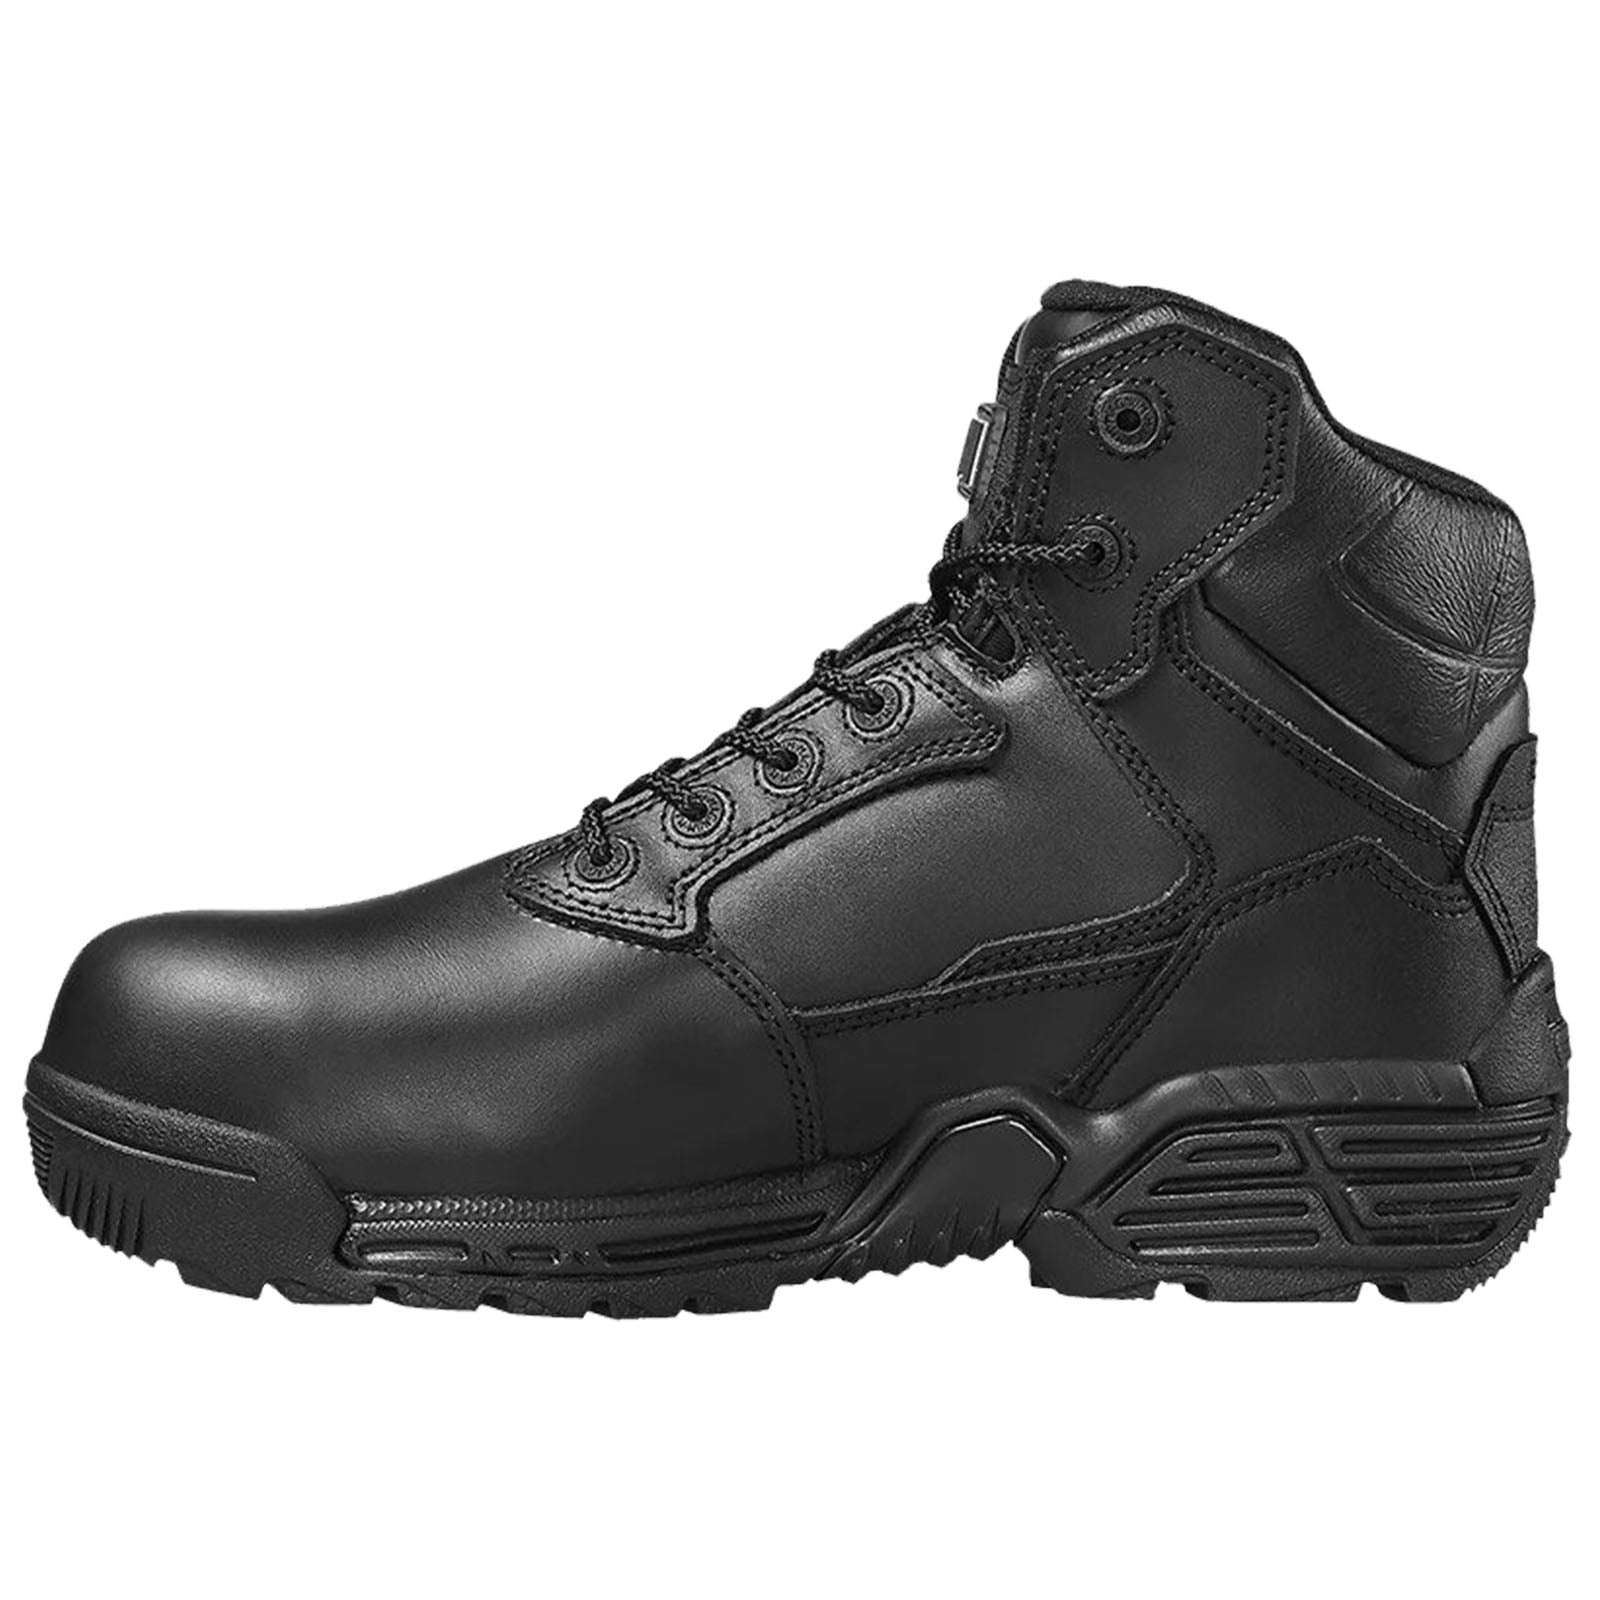 Magnum Unisex Stealth Force 6.0 S3 Safety Boots